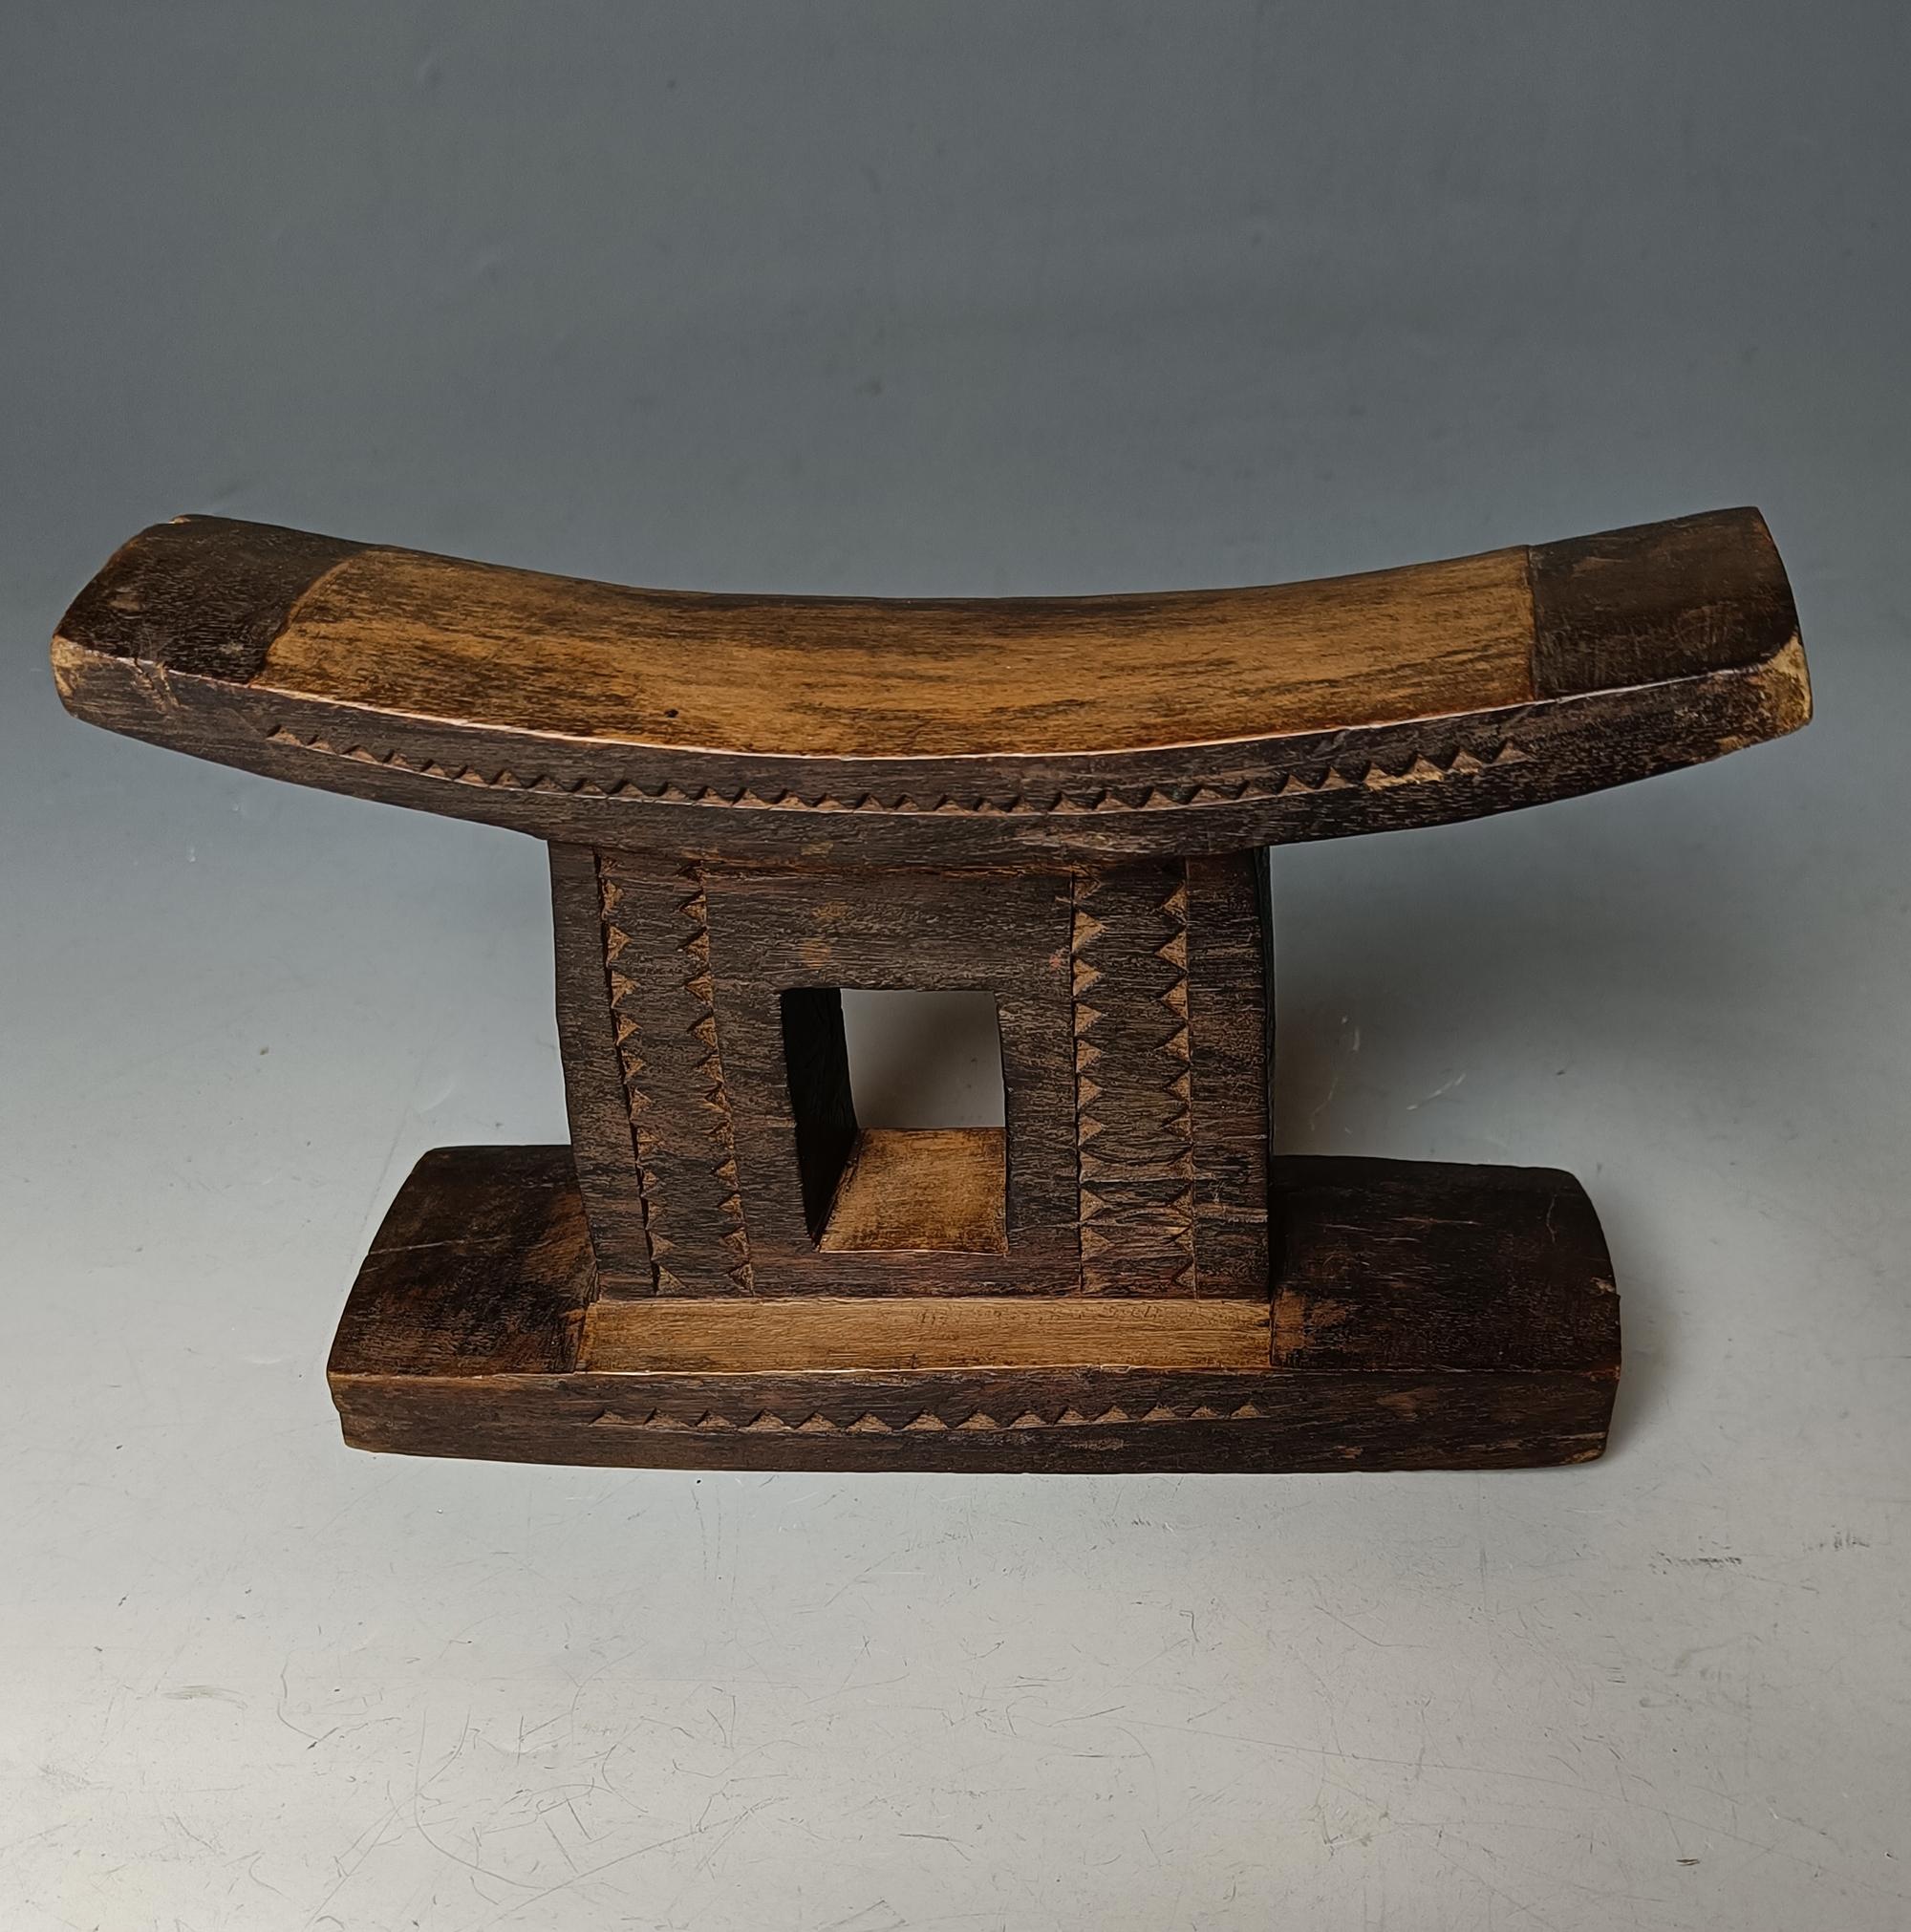 A fine Zulu head rest neck rest South Africa
Raised on central pillars with geometric lozenge shaped carving all over.
Measures: 22 x 14 x 5 cm approx.
Period Early 20th century
Ex UK Collection

The Zulu are well known for their finely carved